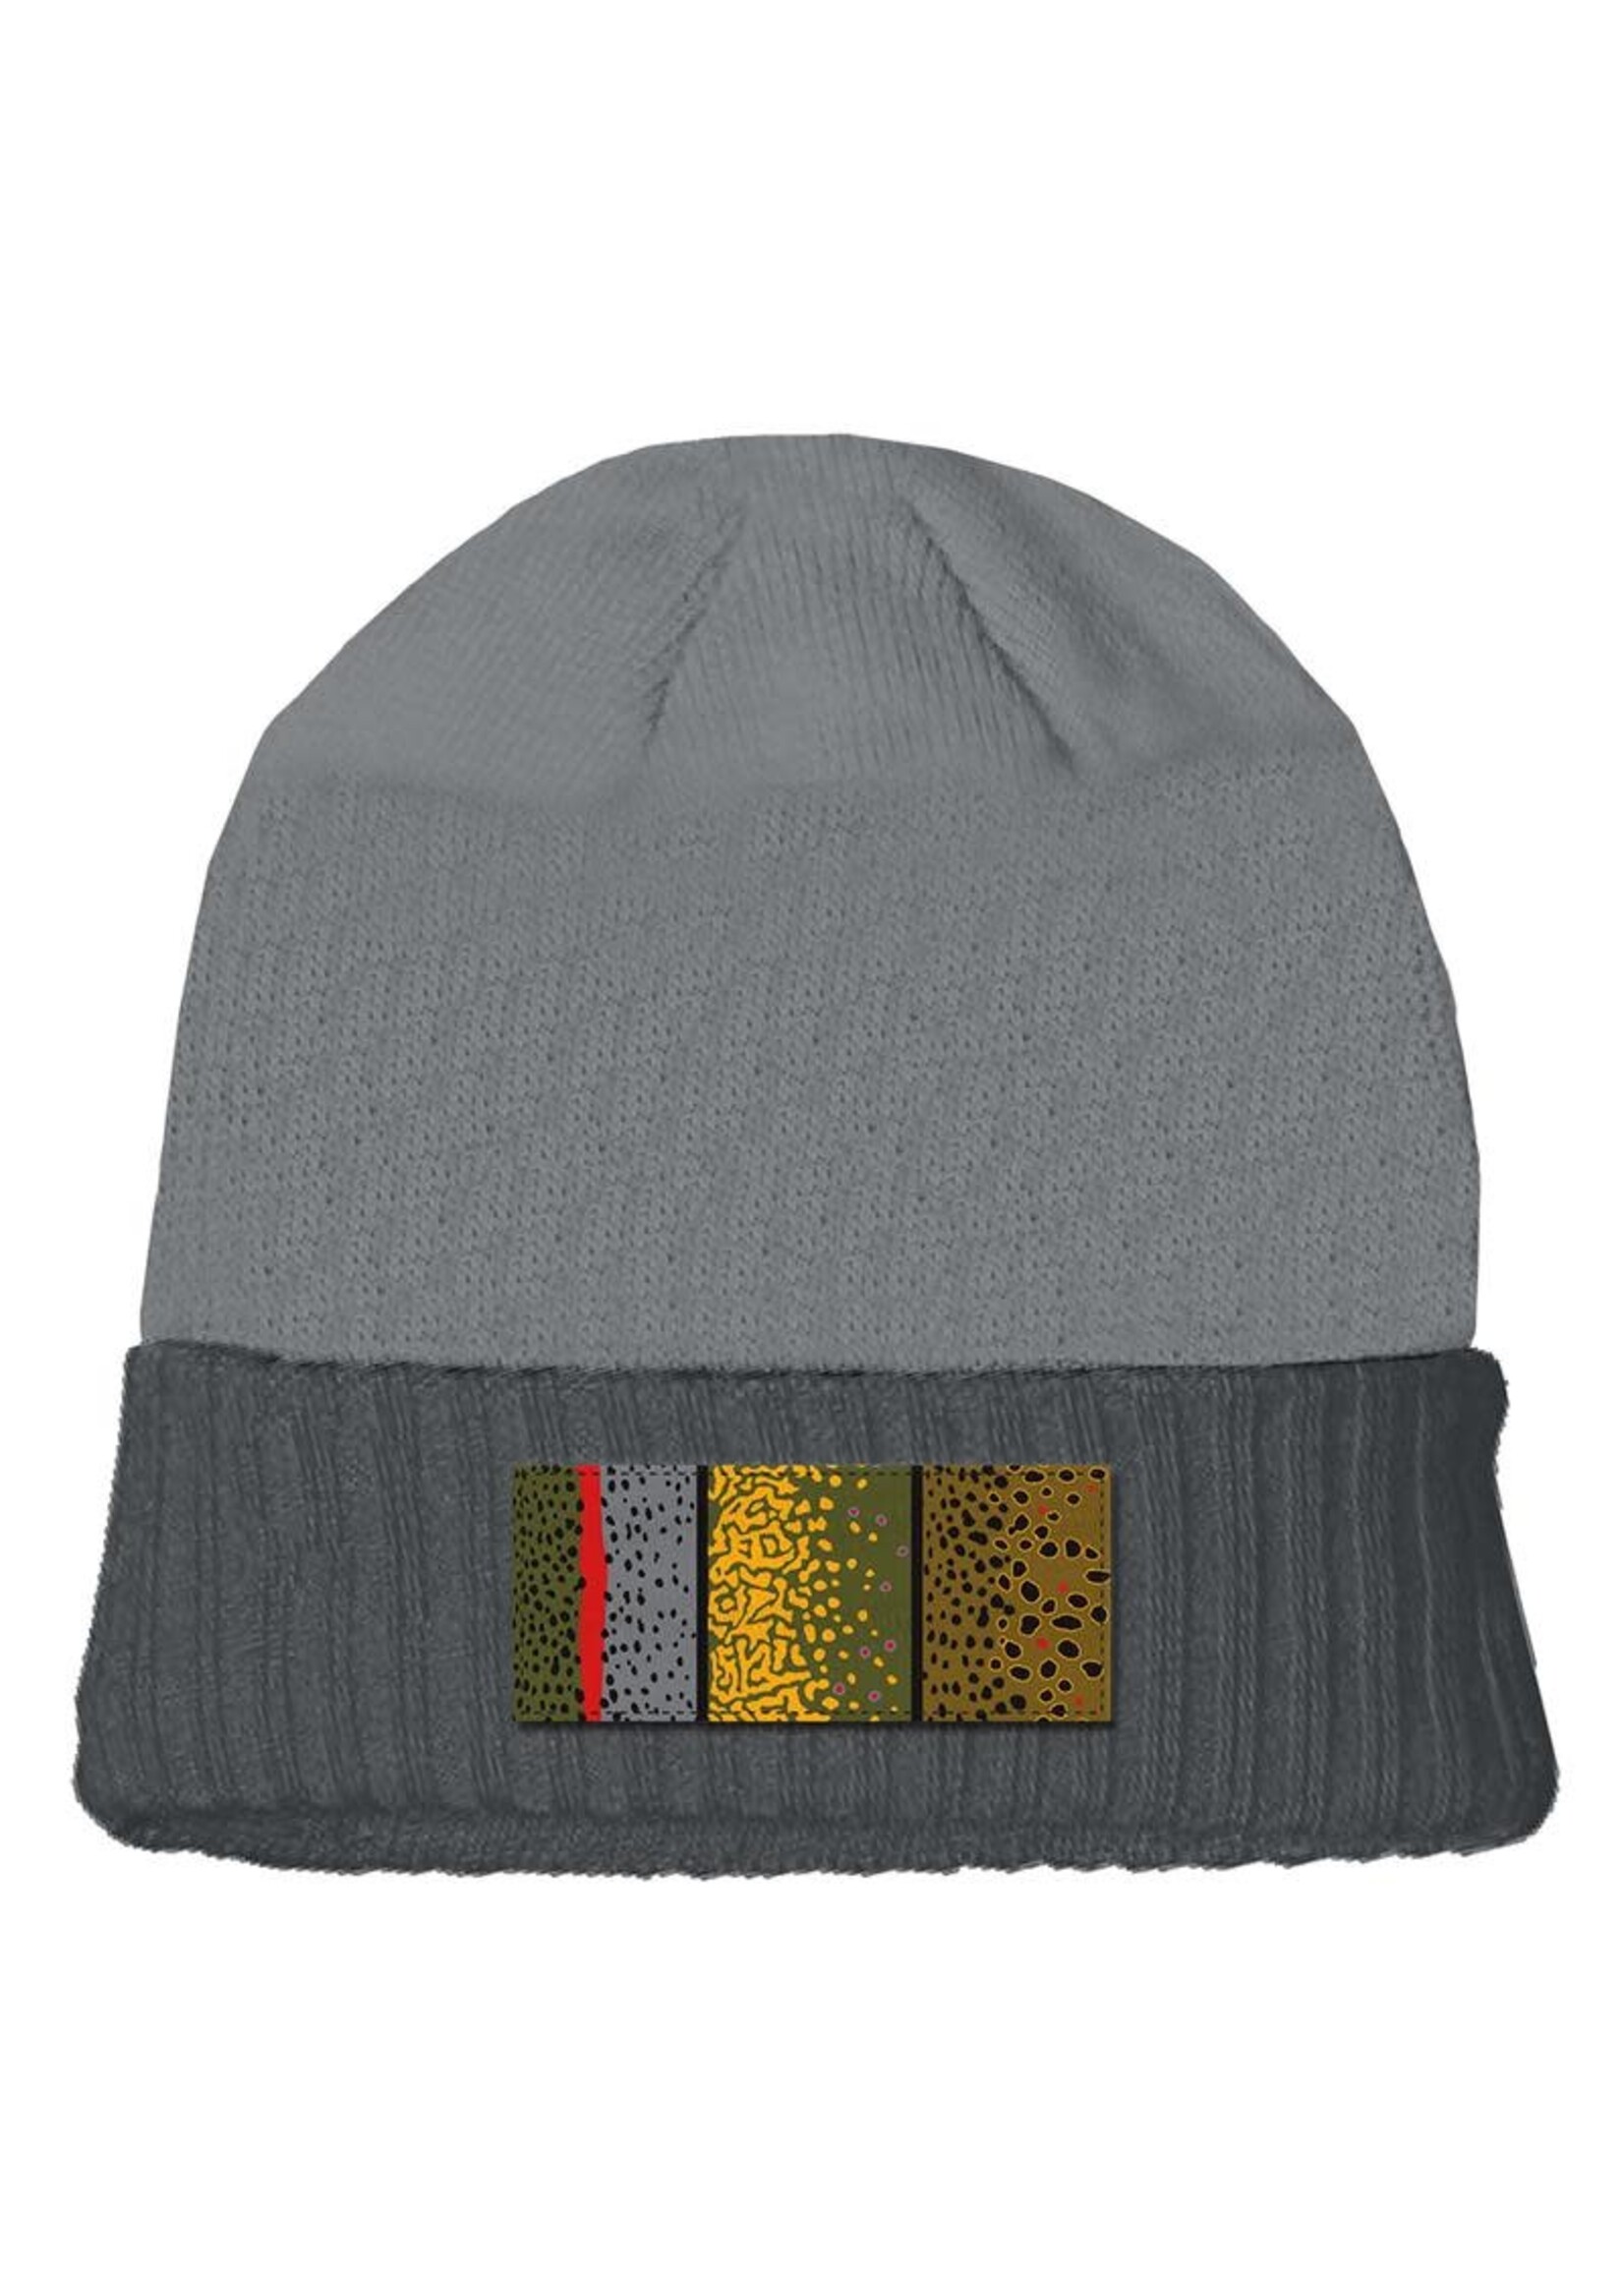 Rep Your Water Rep Your Water Big Three Knit Hat